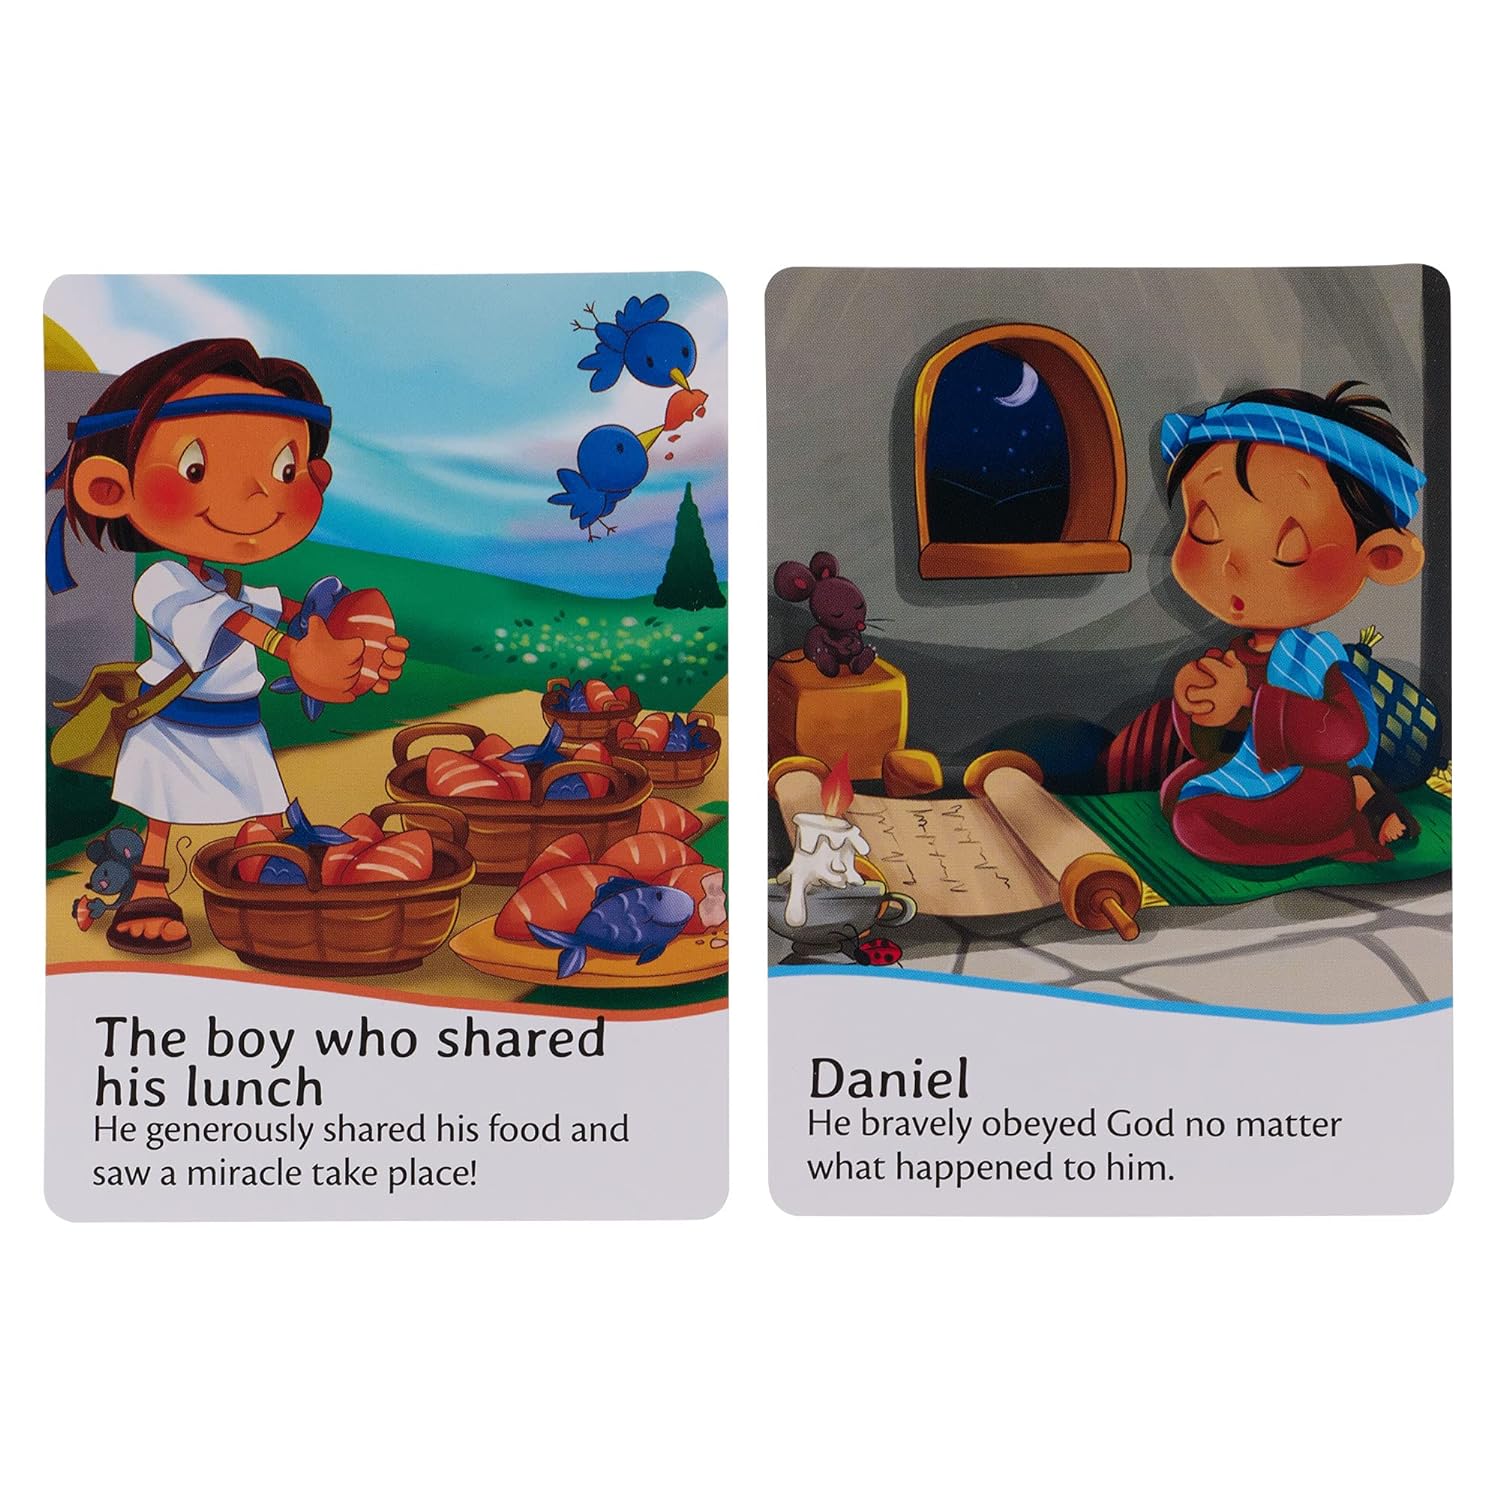 Snap! Children of the Bible Card Game, 48 Double- Sided Cards, Ages 5-8 Christian Game claimedbygoddesigns